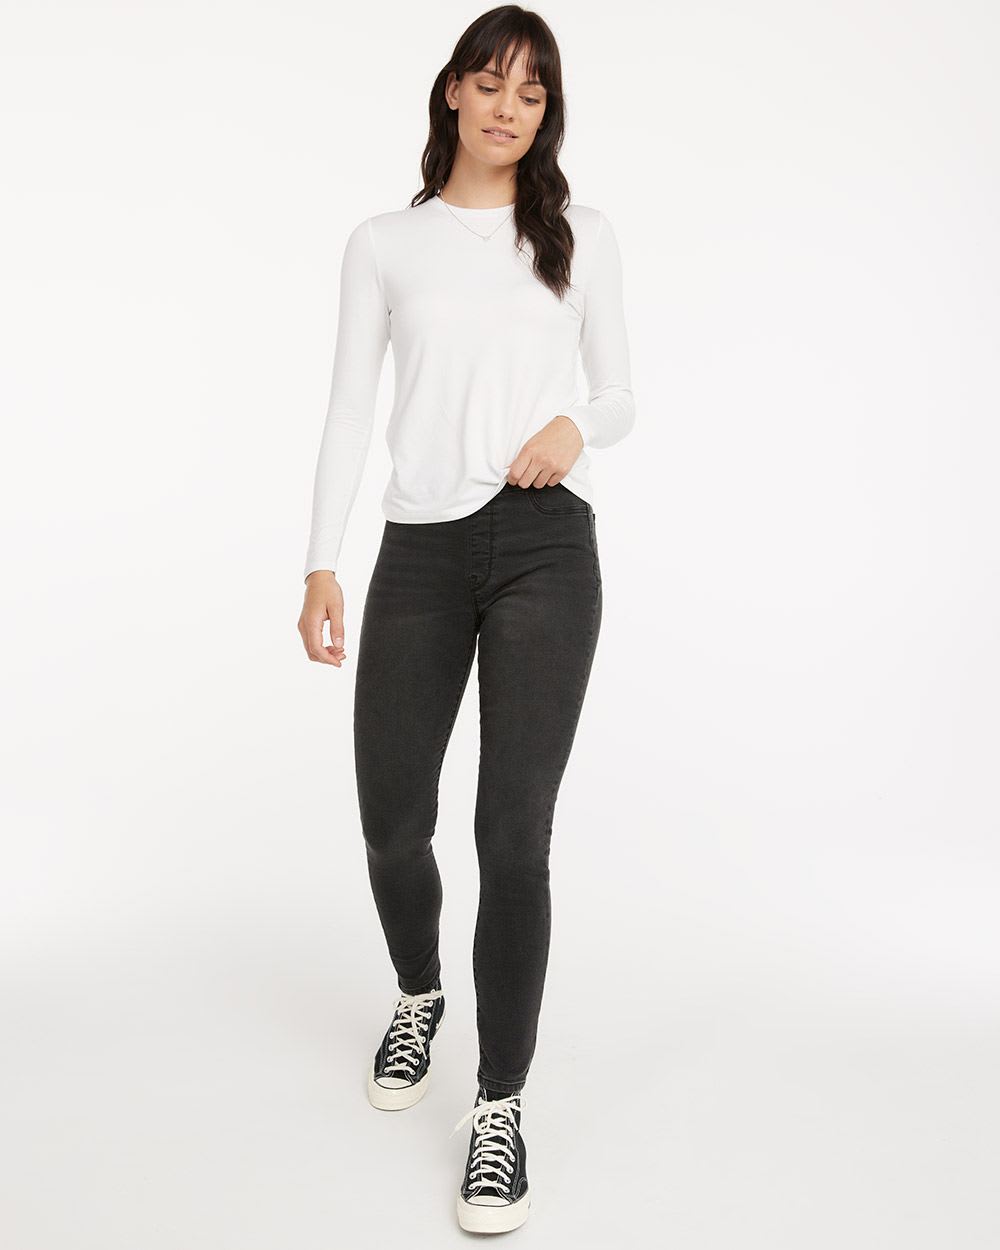 High-Rise Faded Black Legging with 5 Pockets